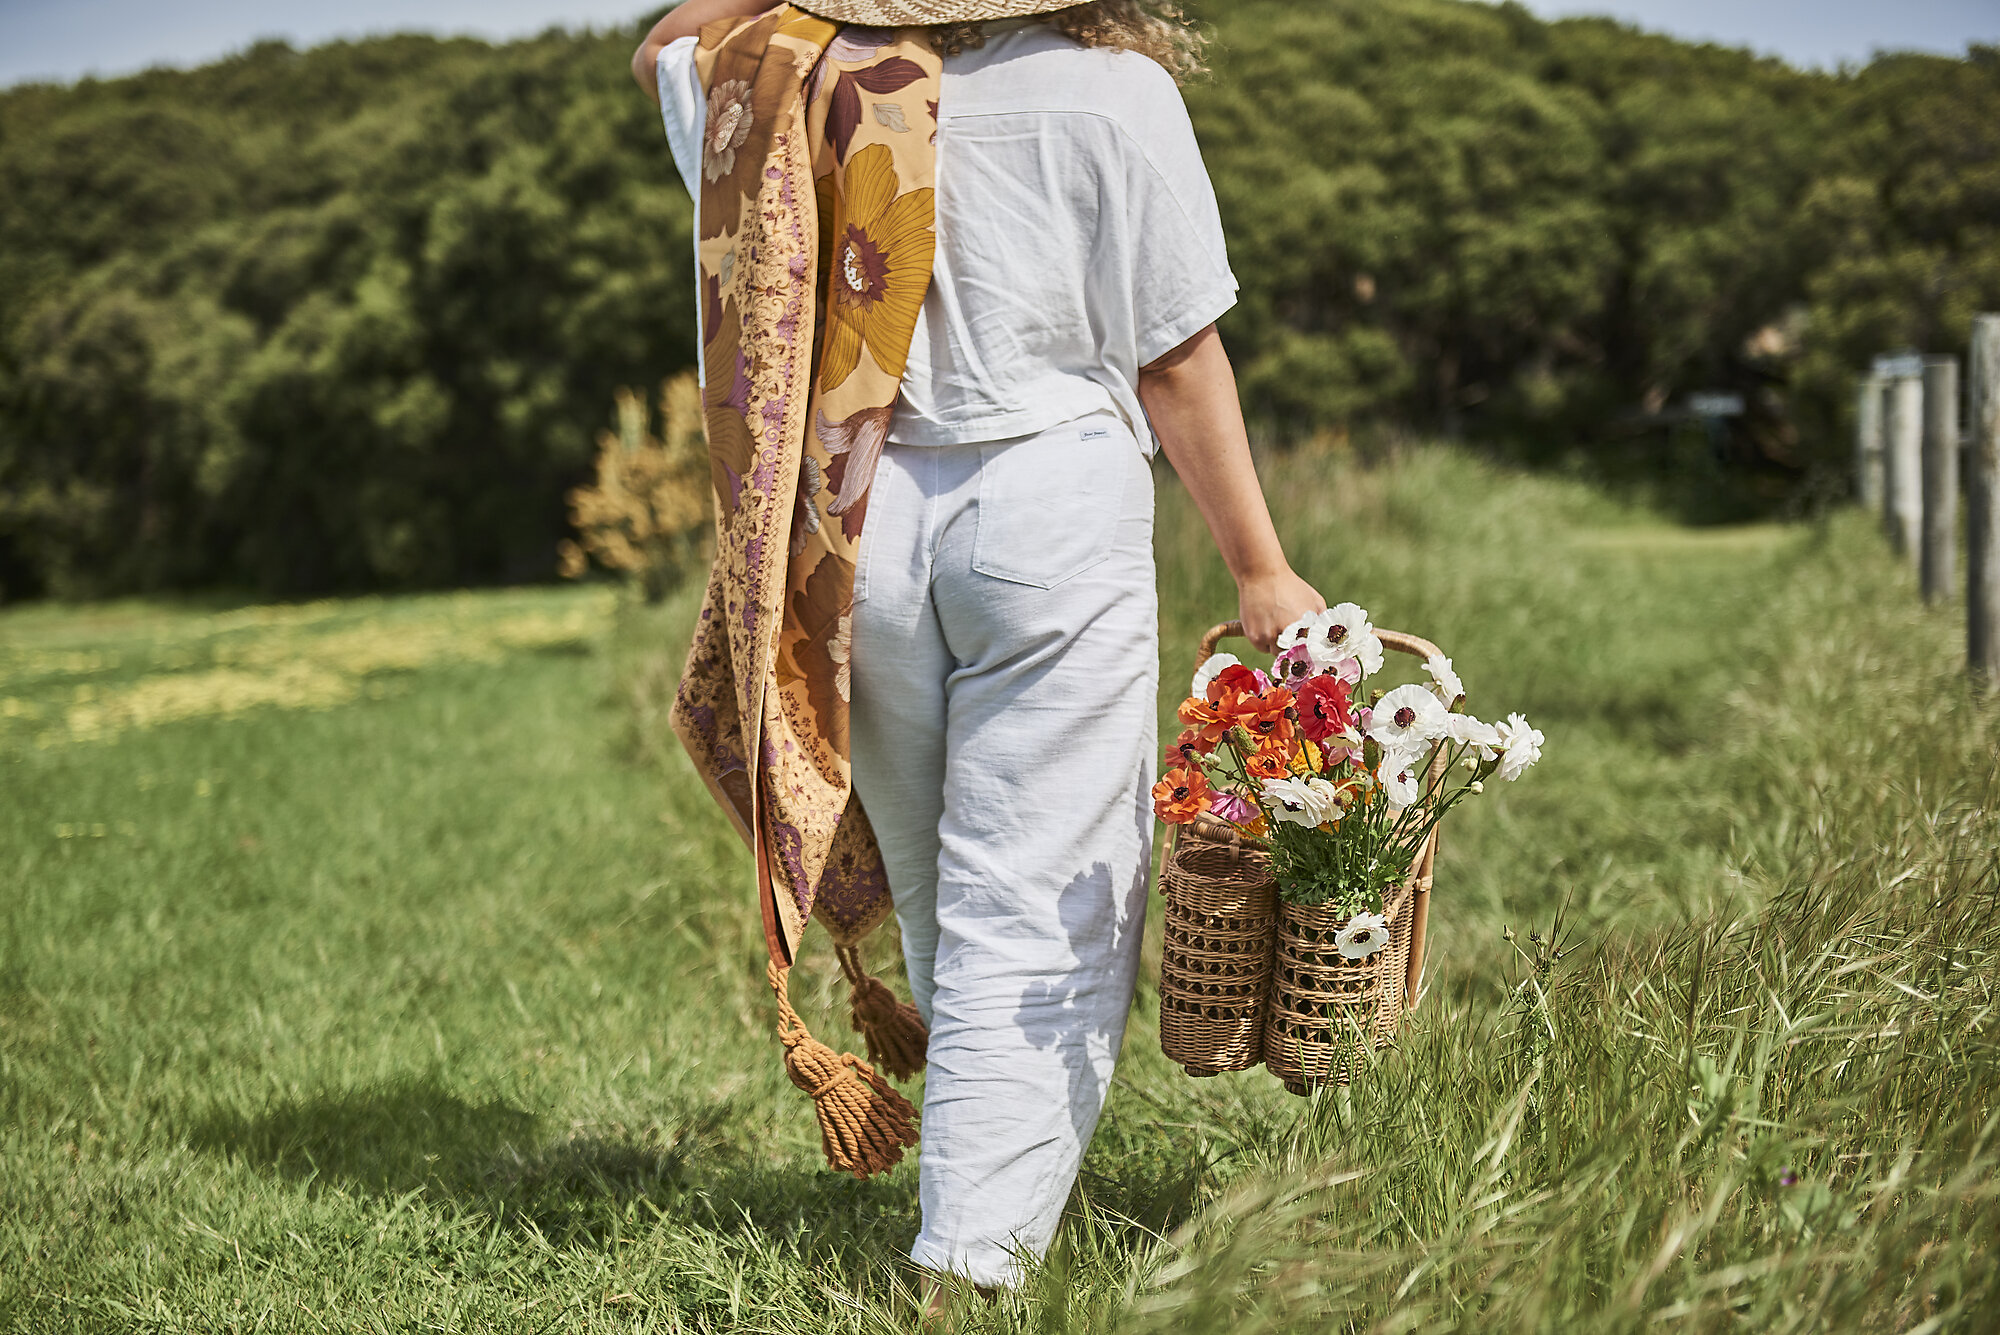 A woman walks carrying a picnic and a rug in the grass.